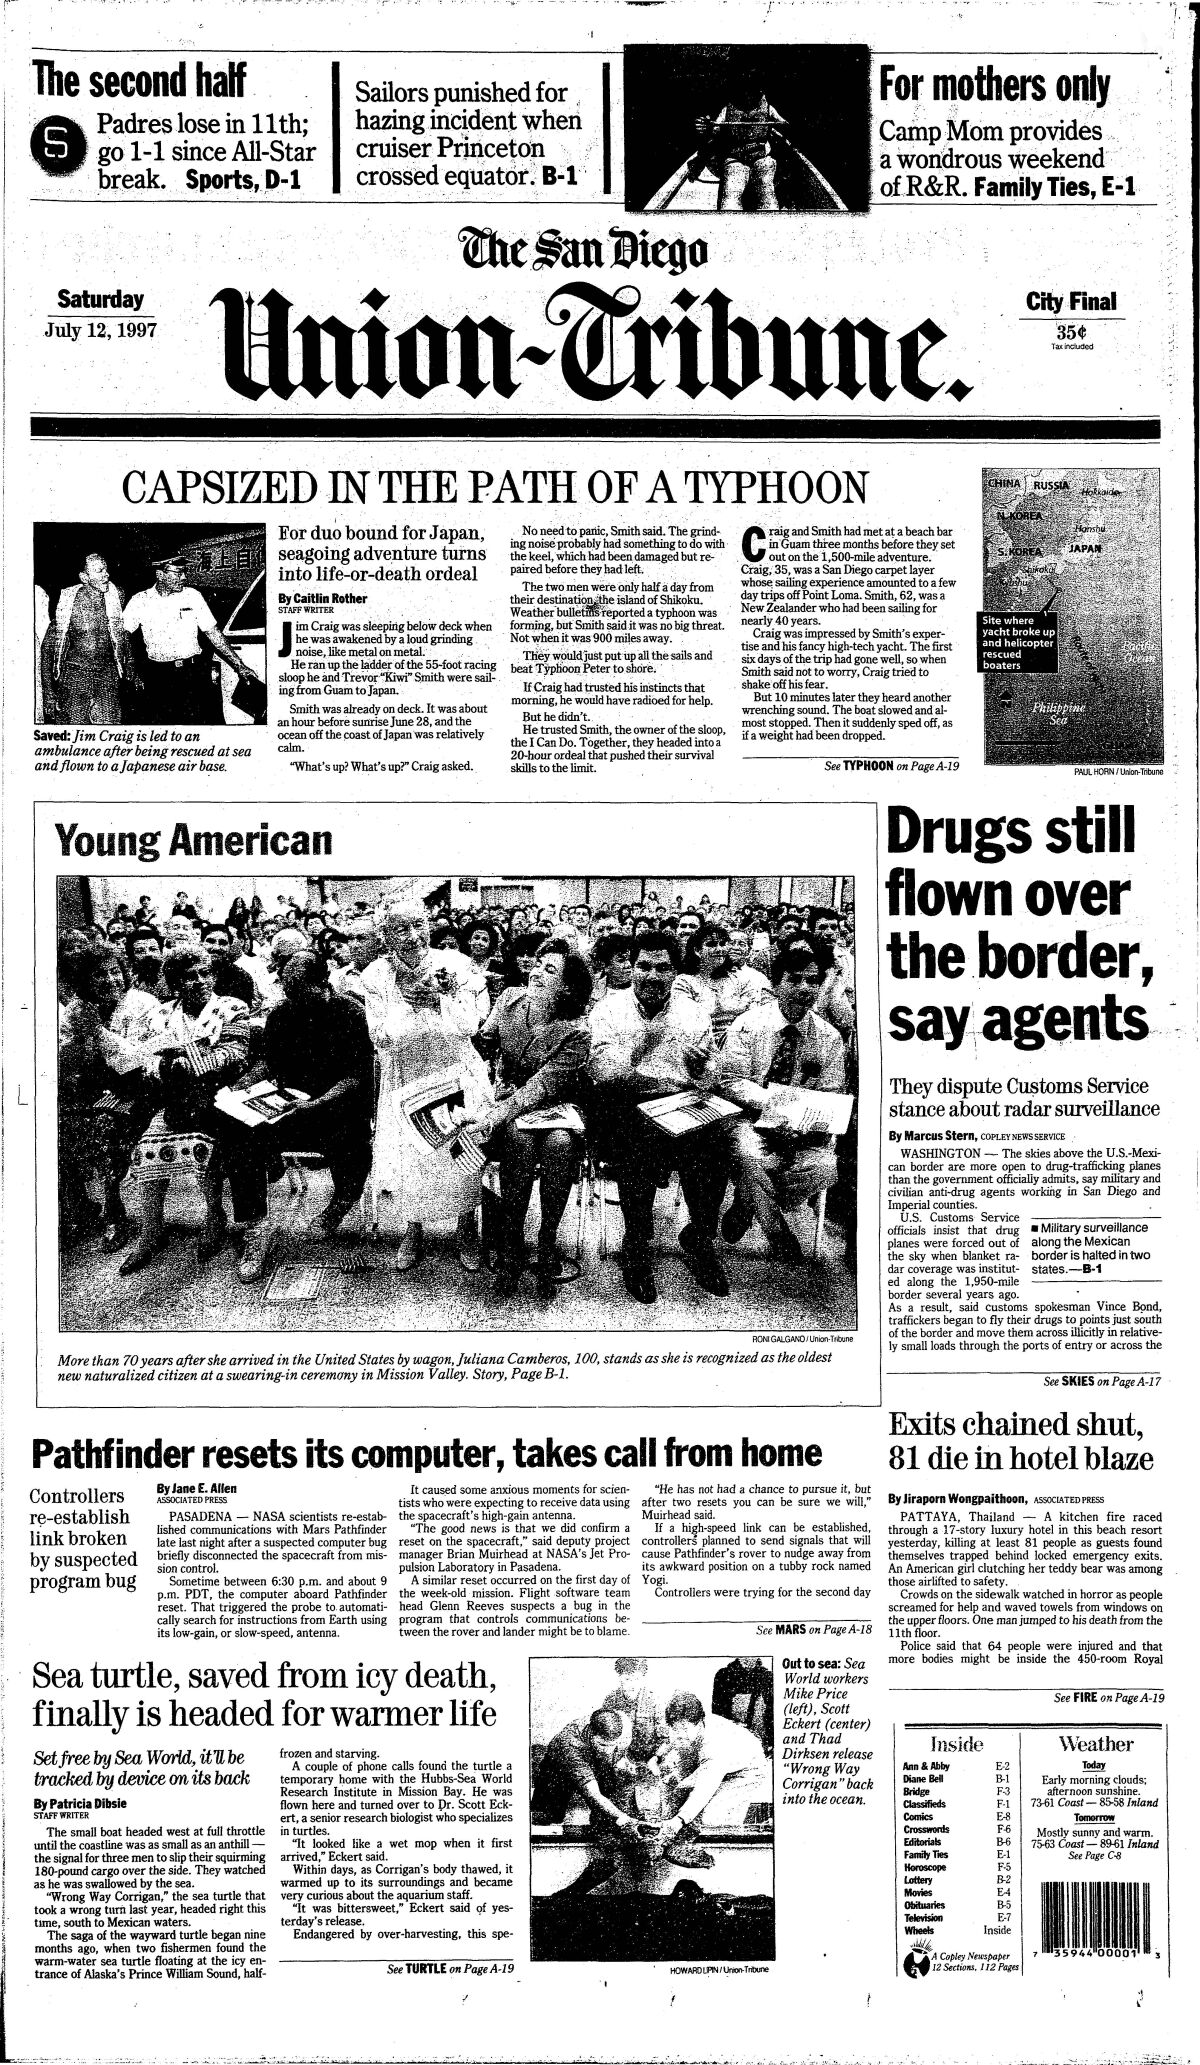 Front page of The San Diego Union-Tribune, July 12, 1997.